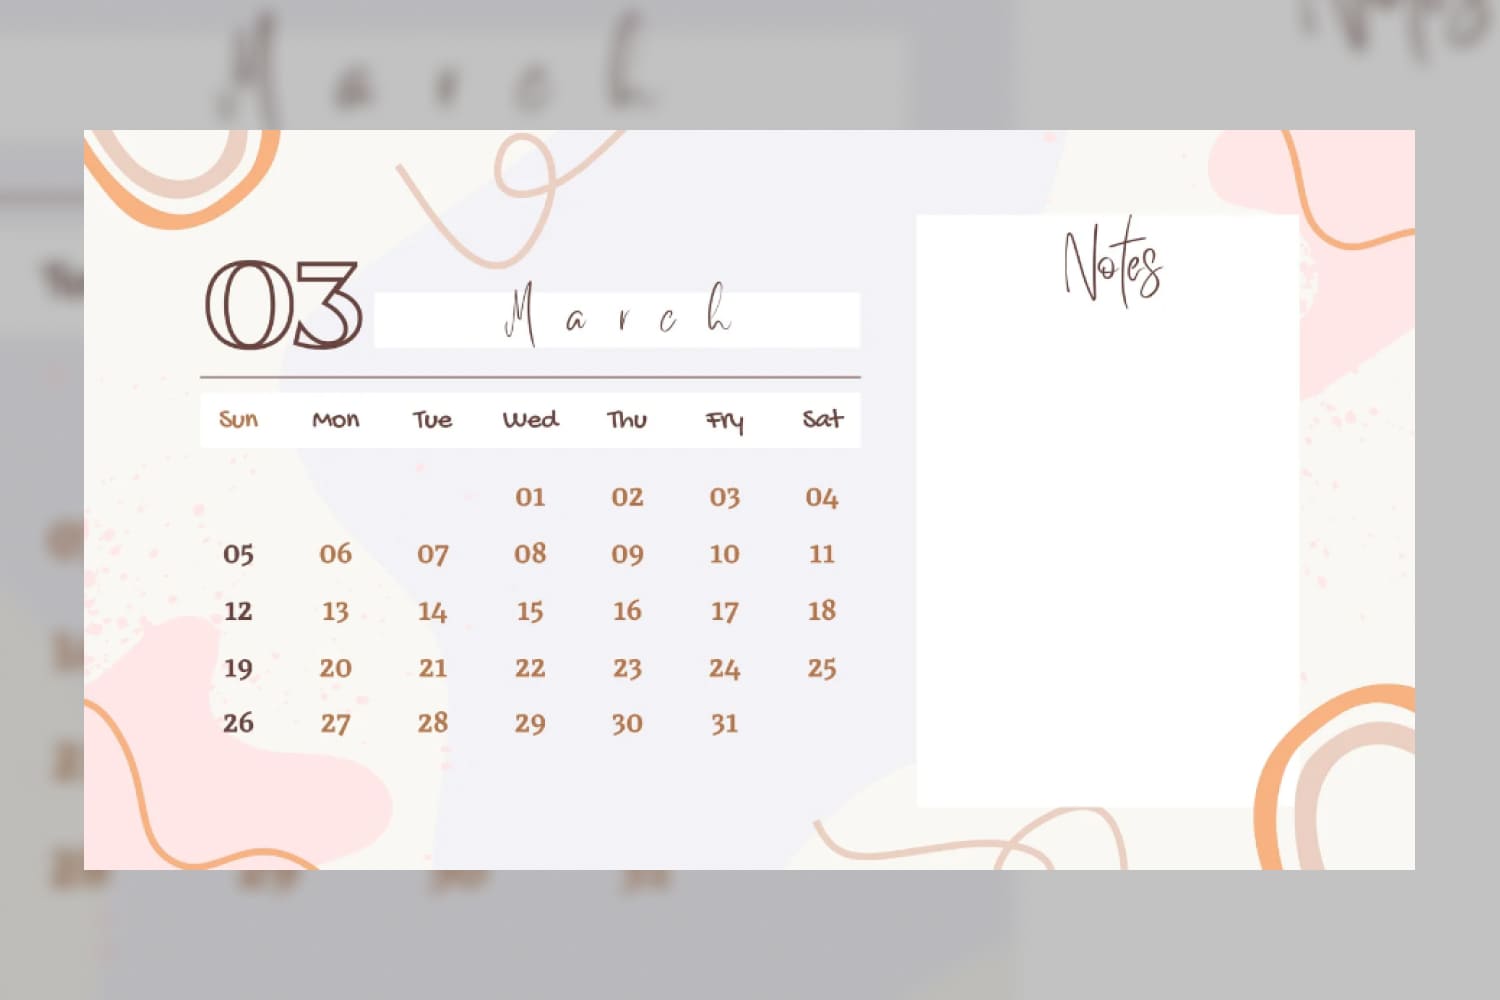 March calendar with modern and minimal design in pink, brown, and white tones.